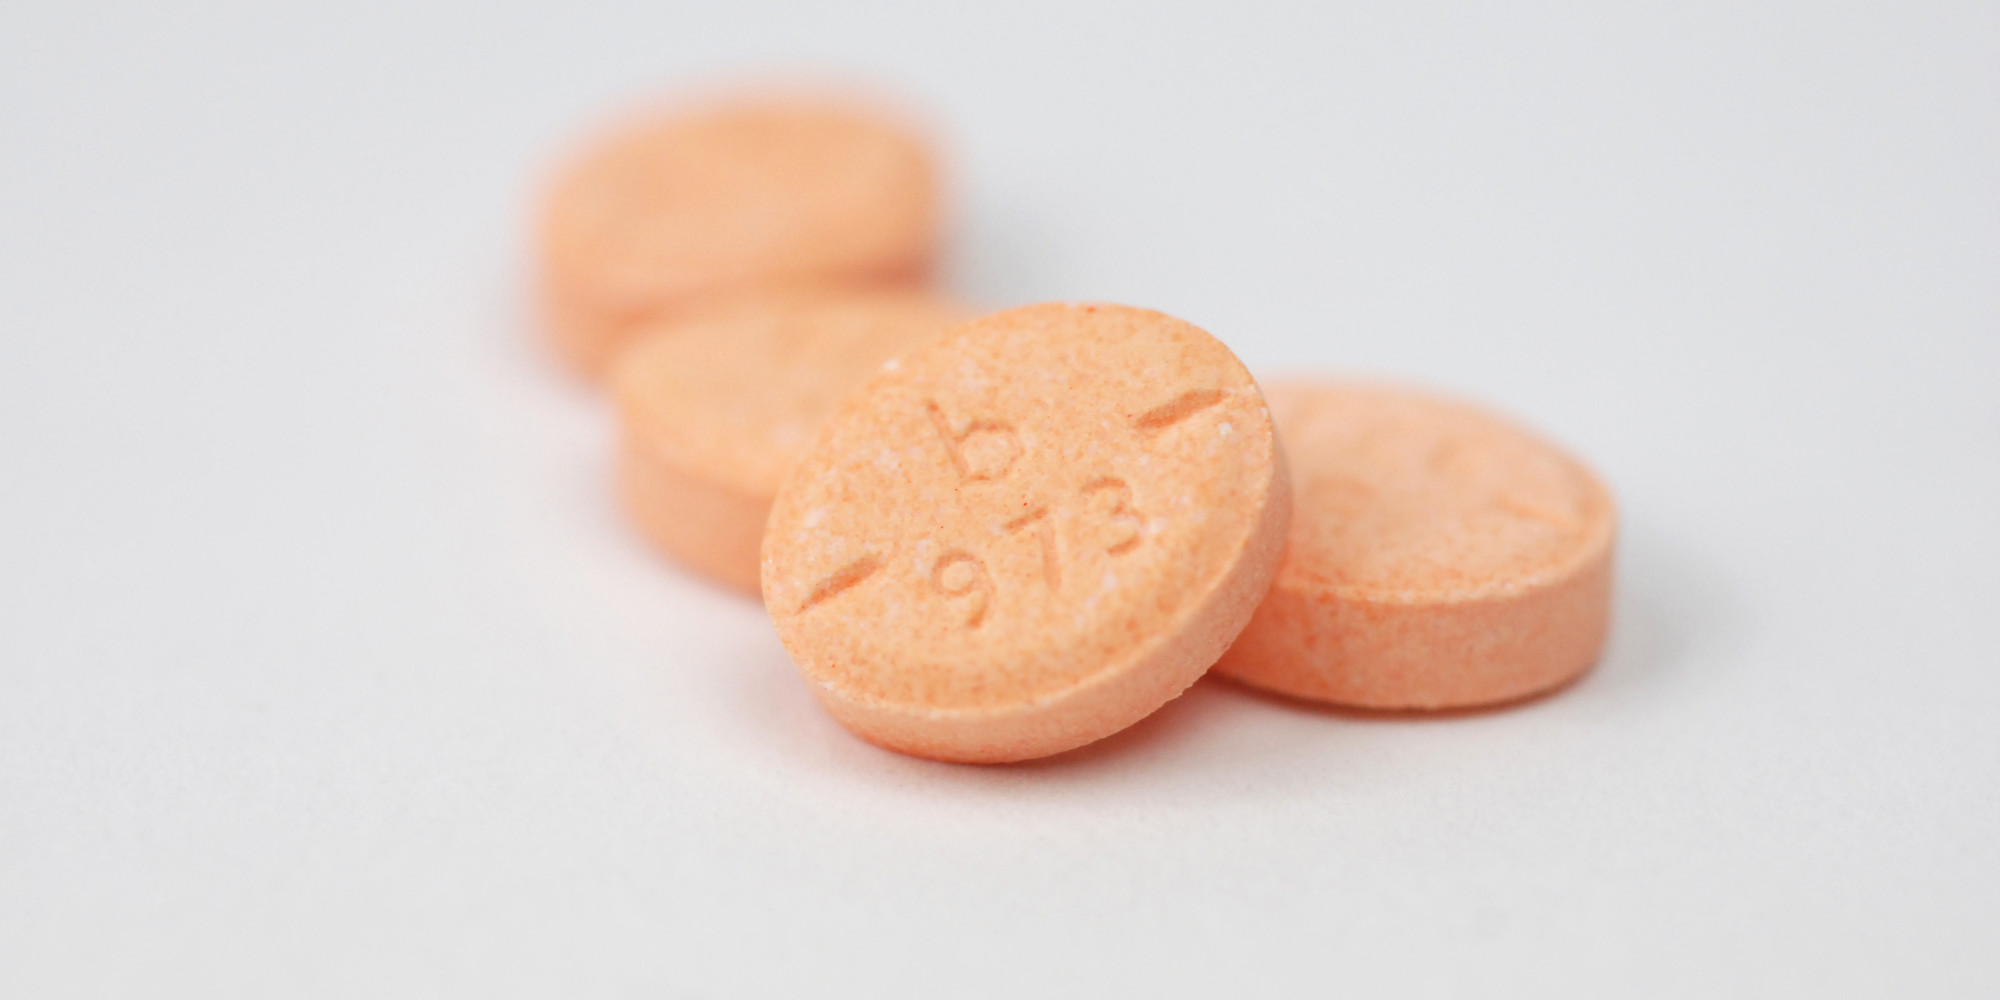 Adderall Empire: The Little Orange Pill That Delivers Fake ...